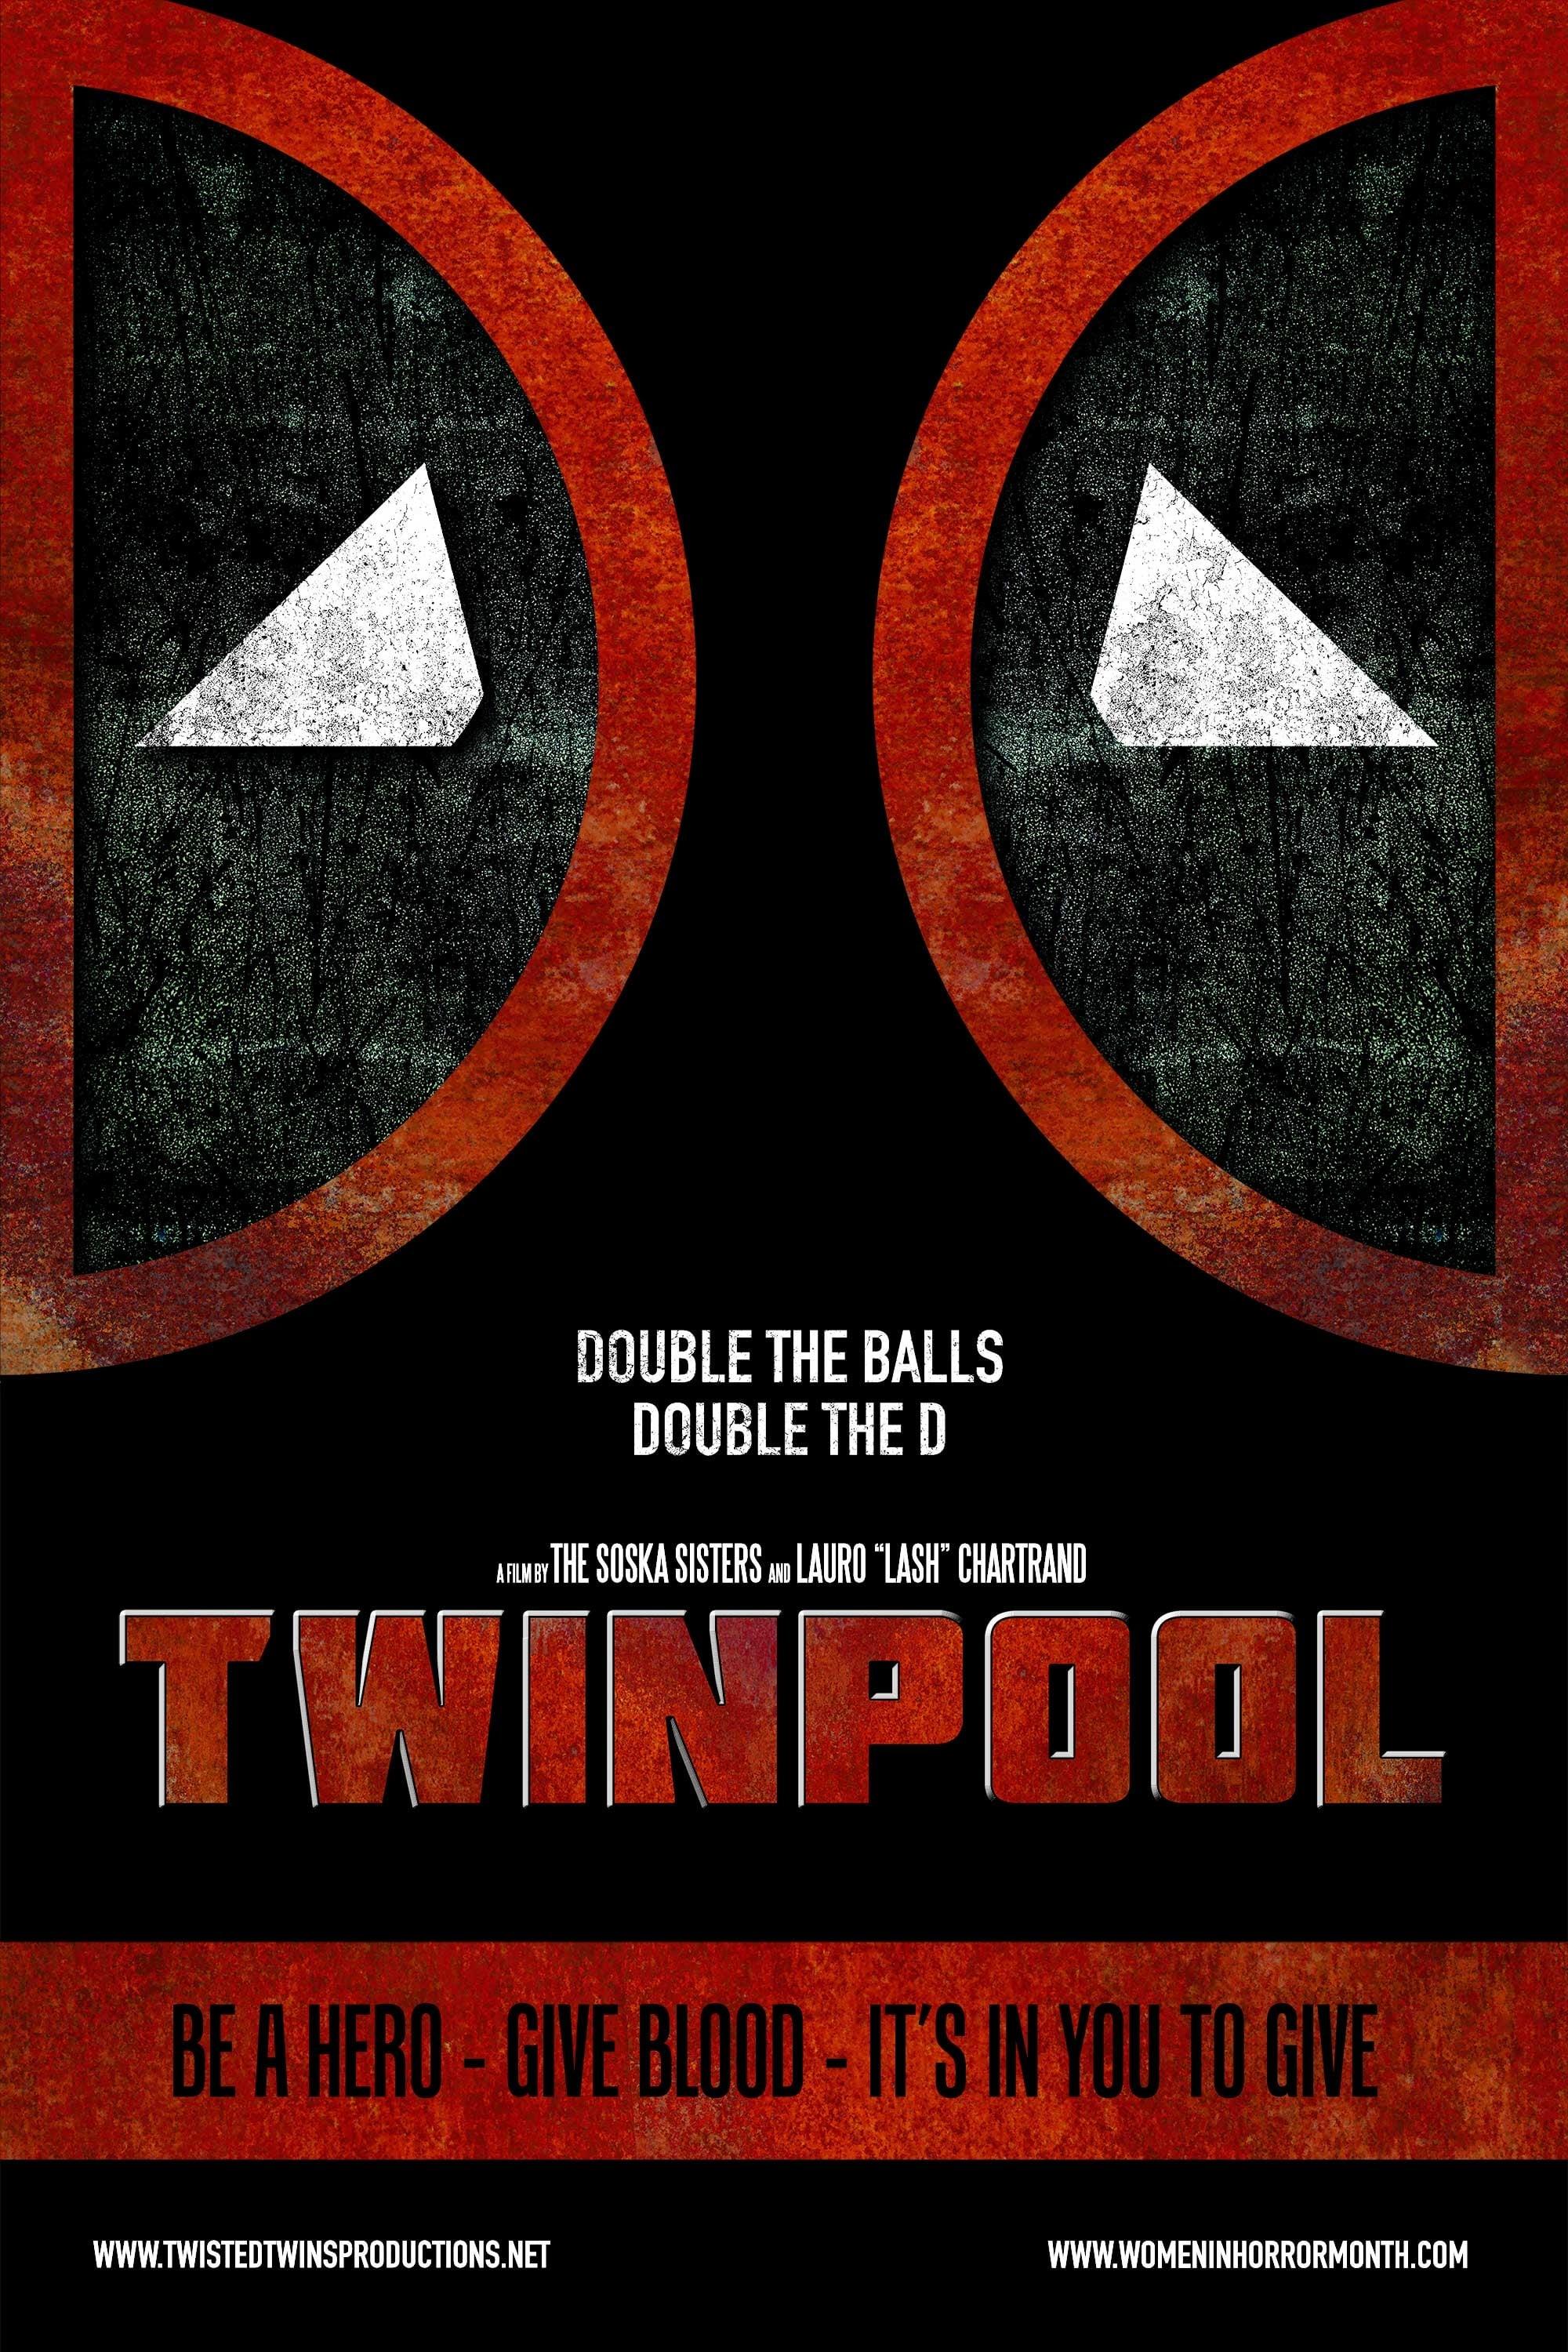 Twinpool poster